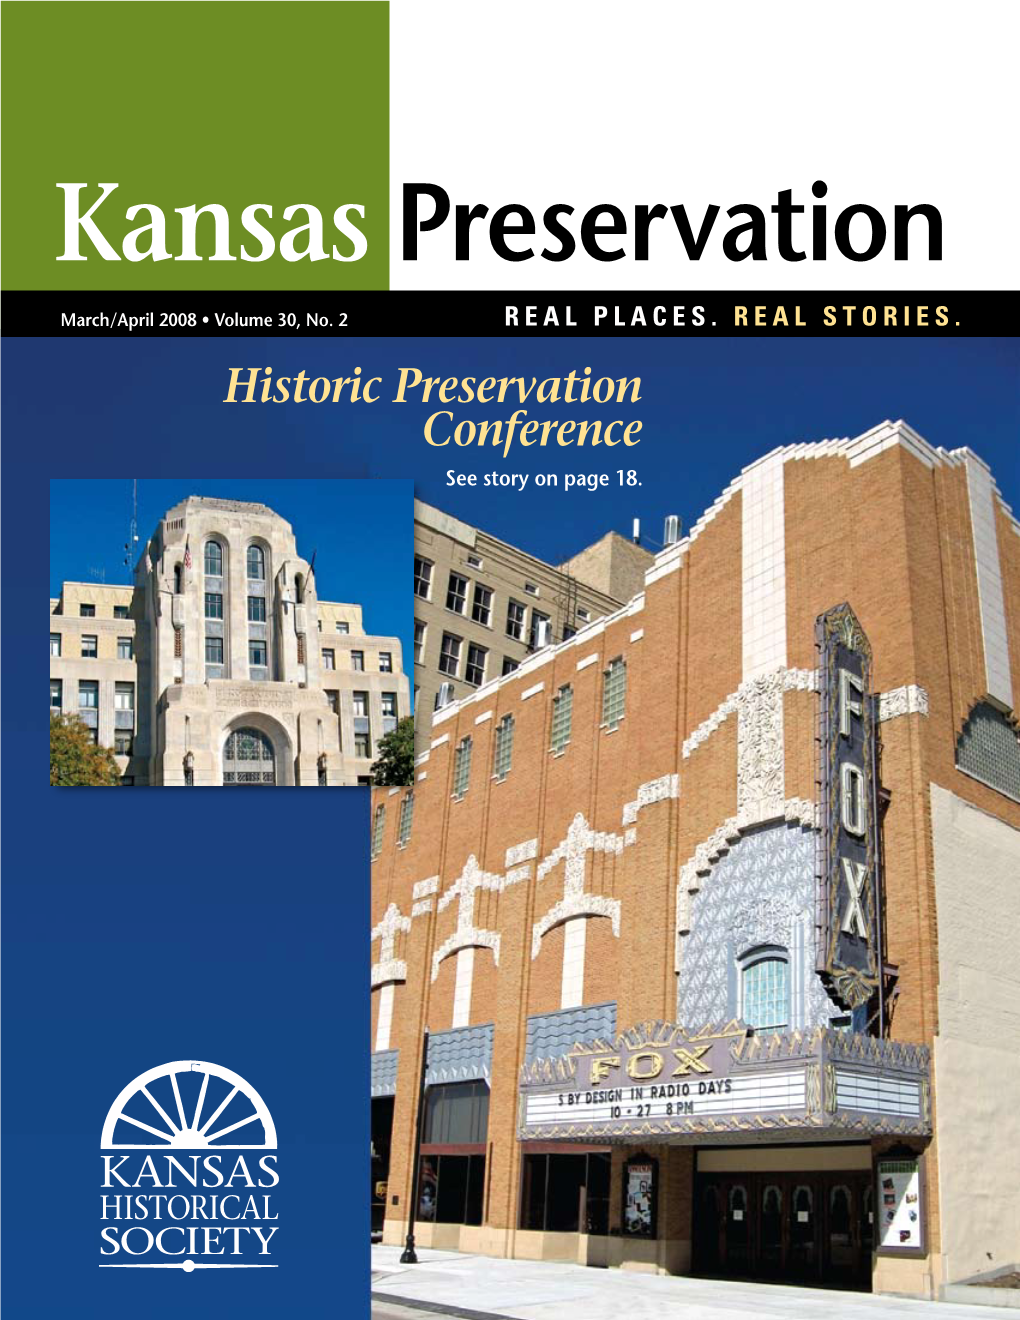 Historic Preservation Conference See Story on Page 18